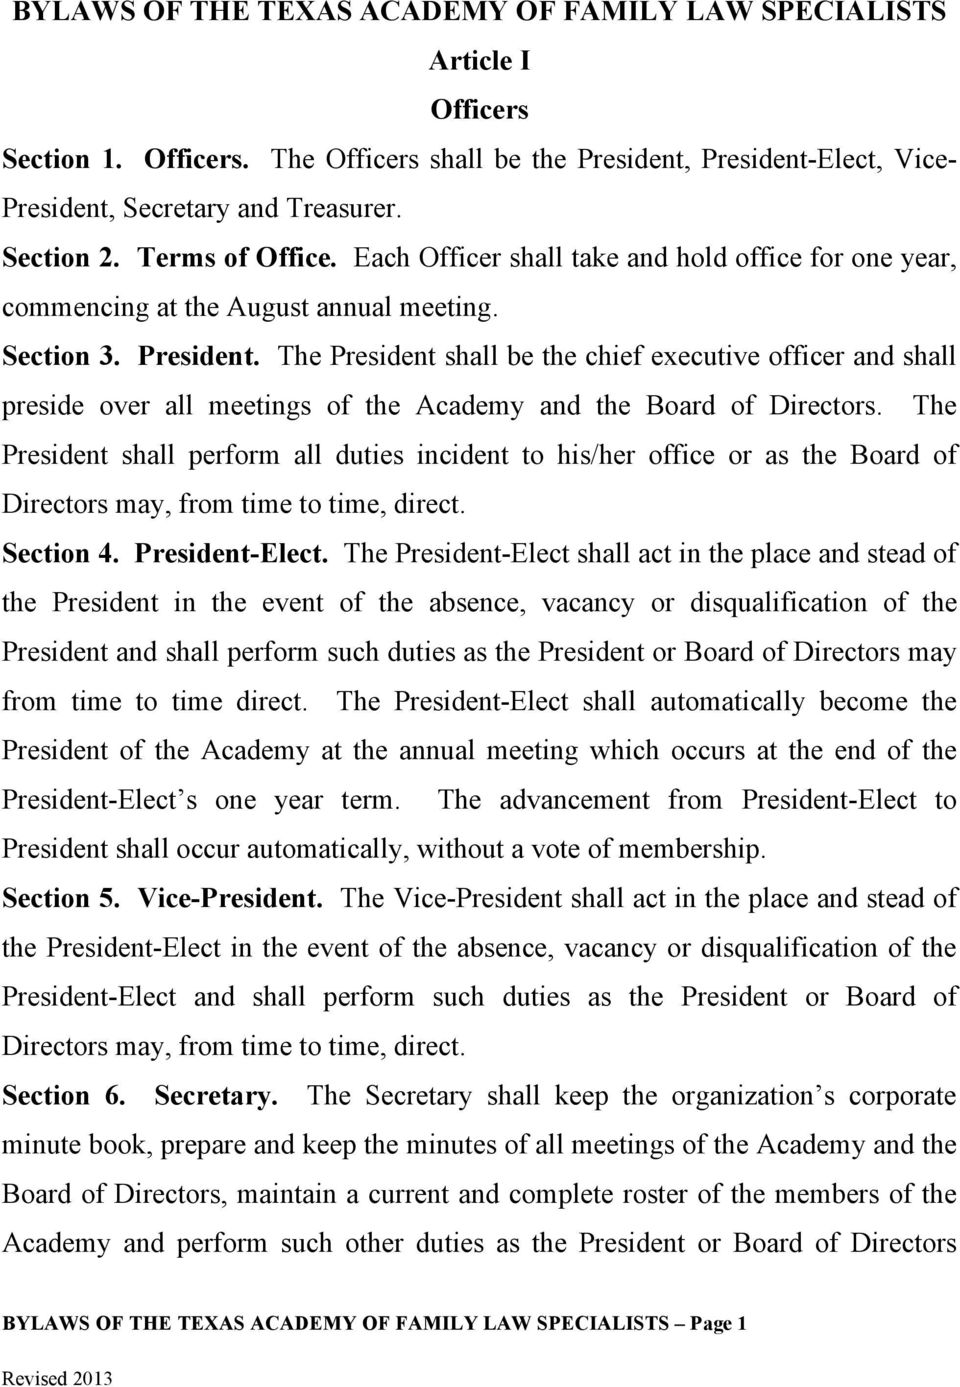 The President shall be the chief executive officer and shall preside over all meetings of the Academy and the Board of Directors.